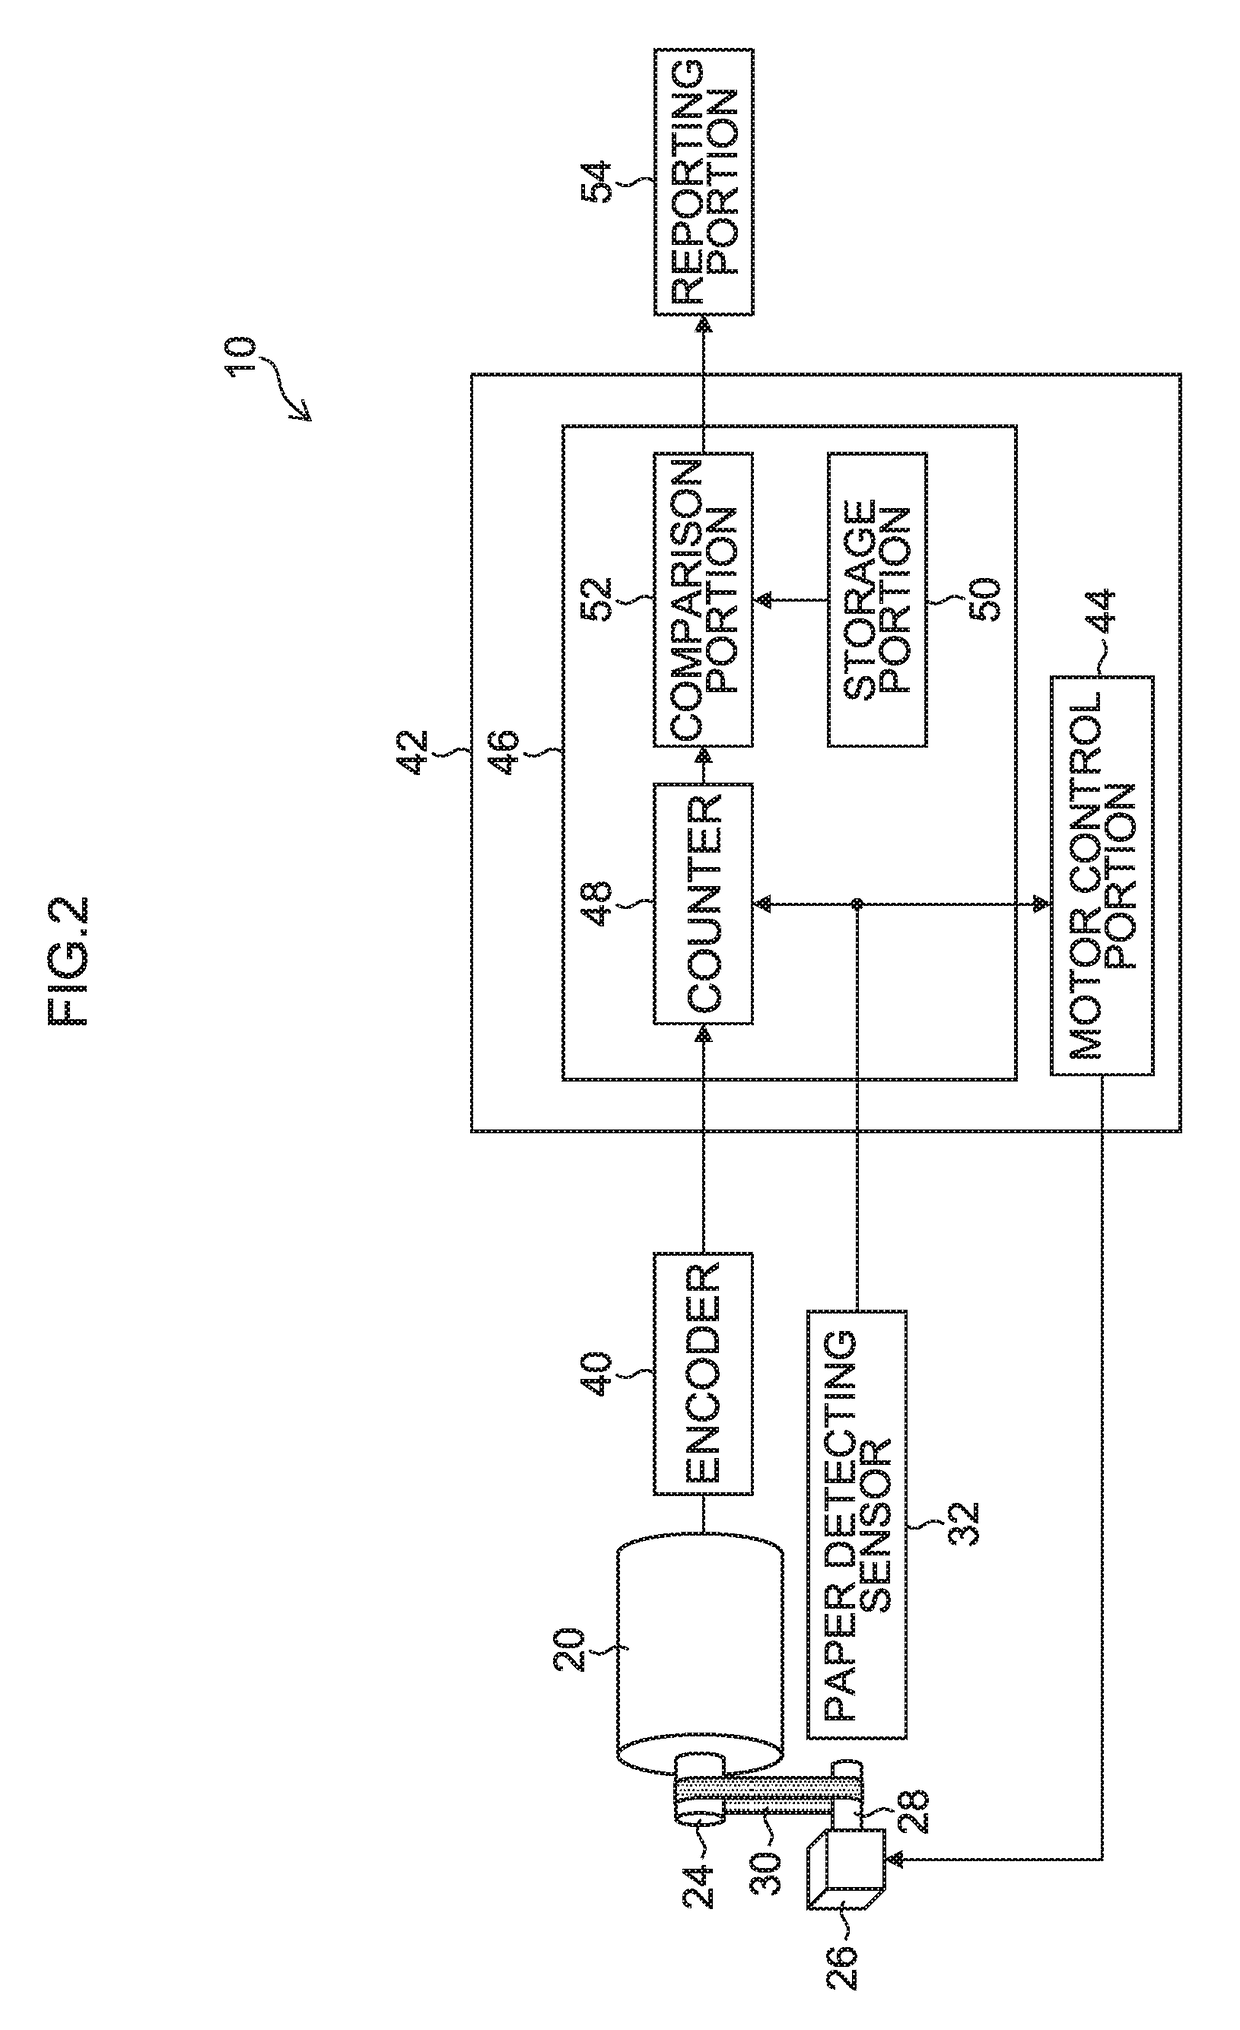 Paper conveying apparatus and method